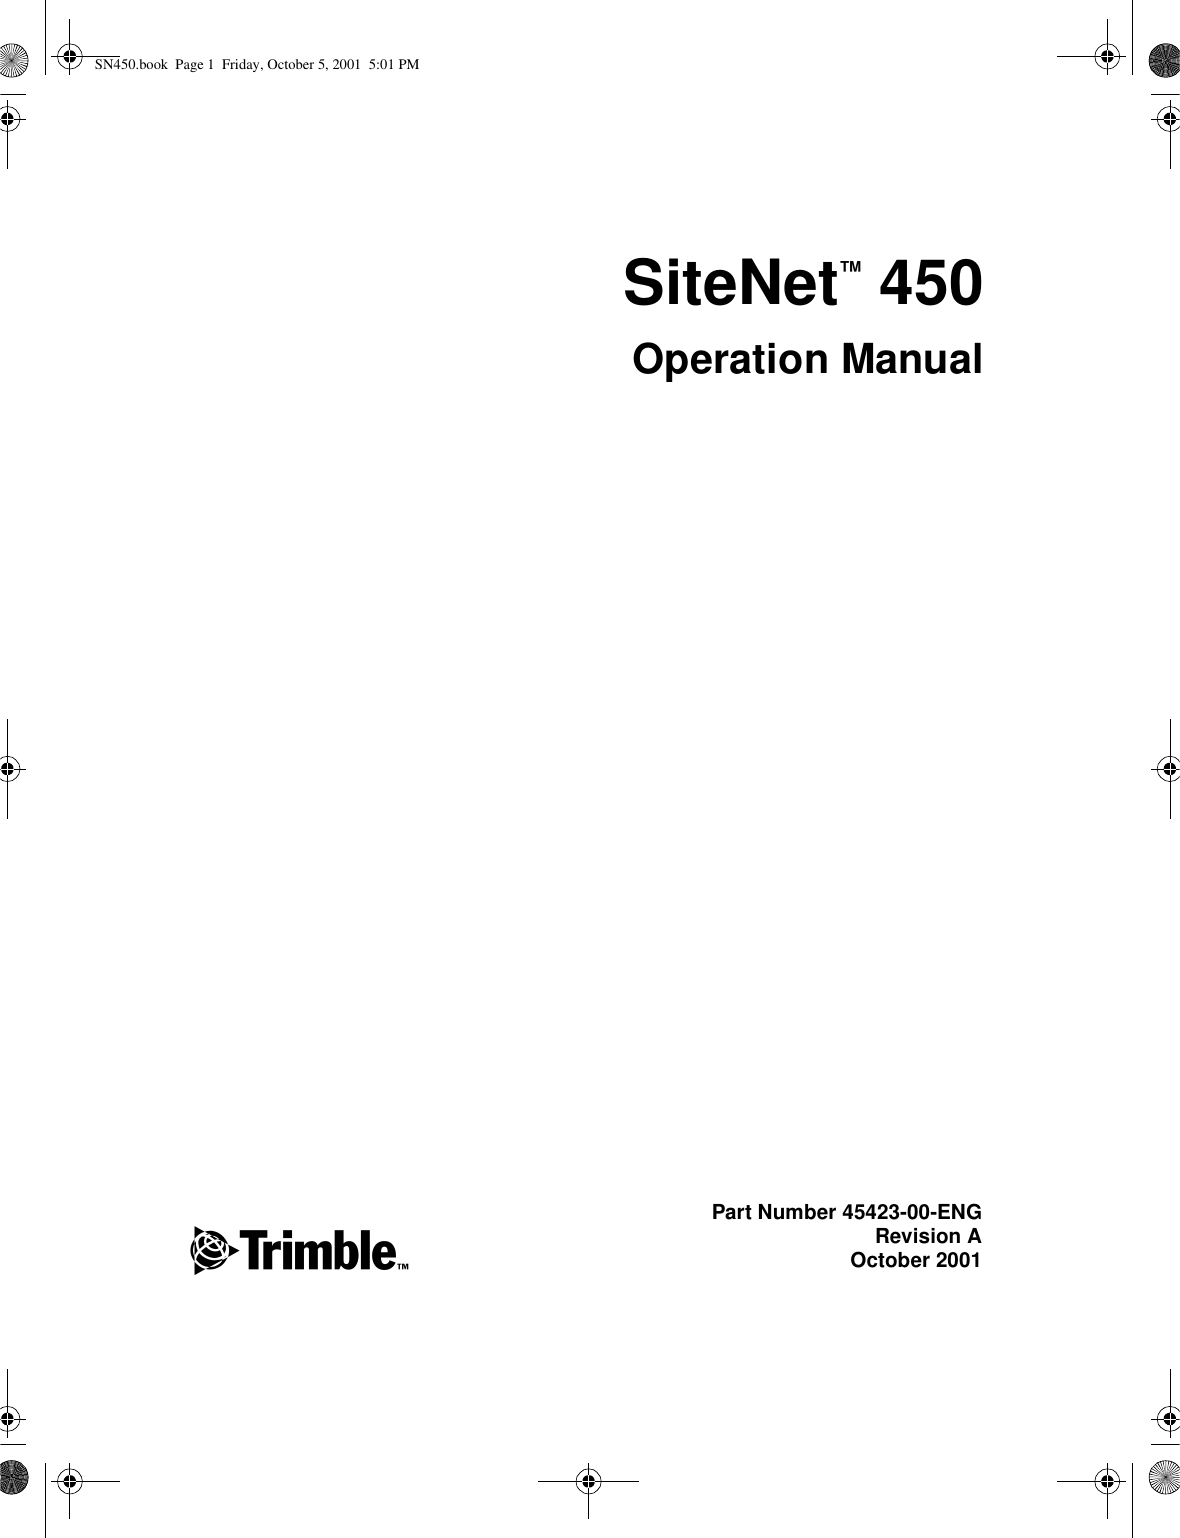 FPart Number 45423-00-ENGRevision AOctober 2001SiteNet™ 450Operation ManualSN450.book  Page 1  Friday, October 5, 2001  5:01 PM